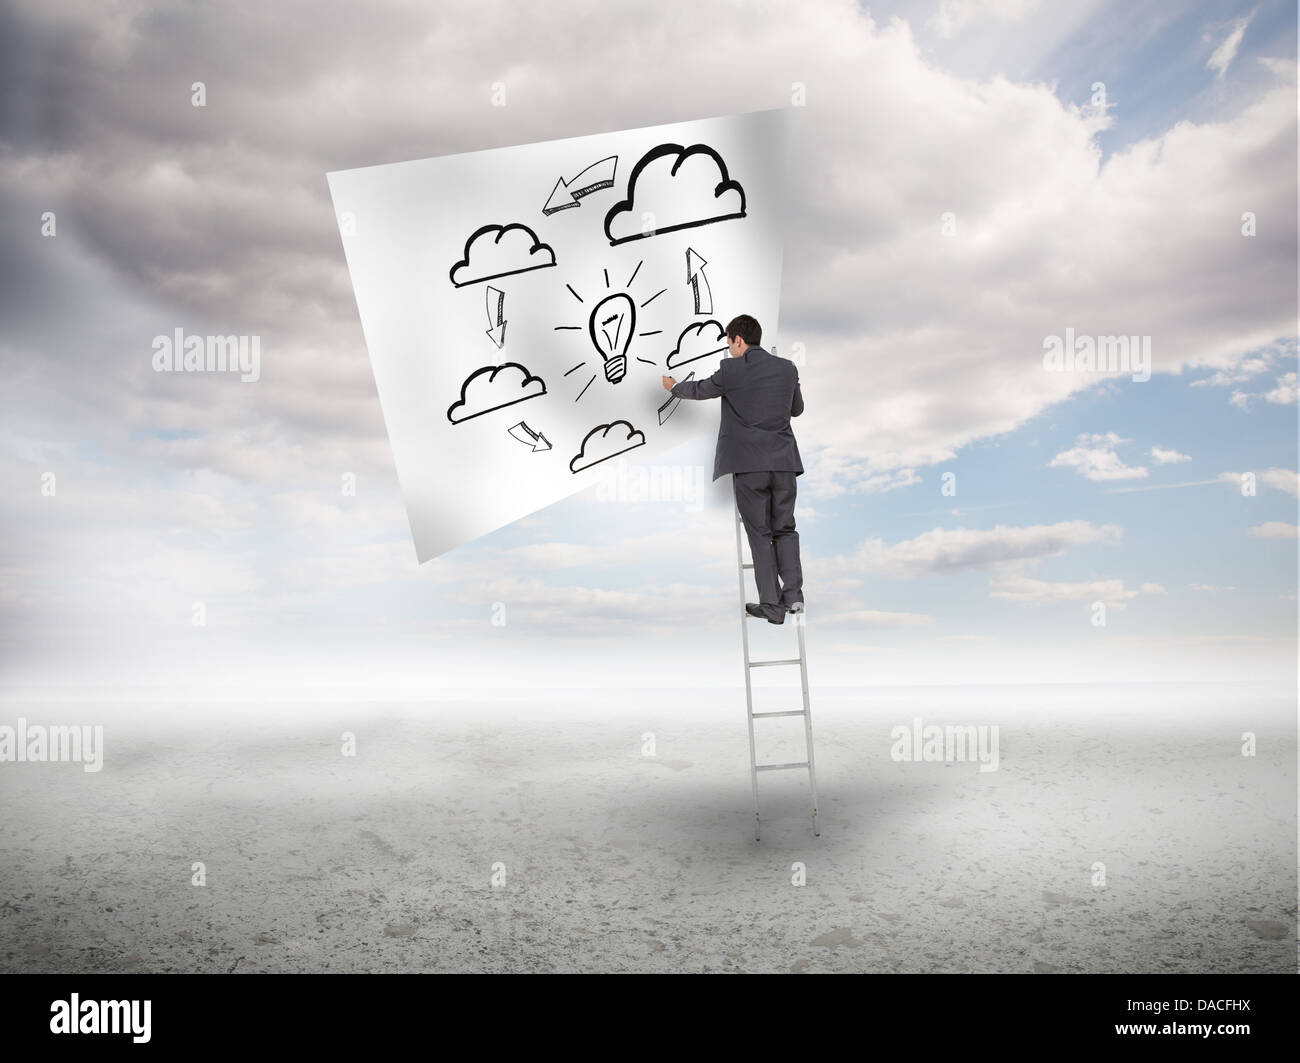 Businessman standing on a ladder drawing a process Stock Photo